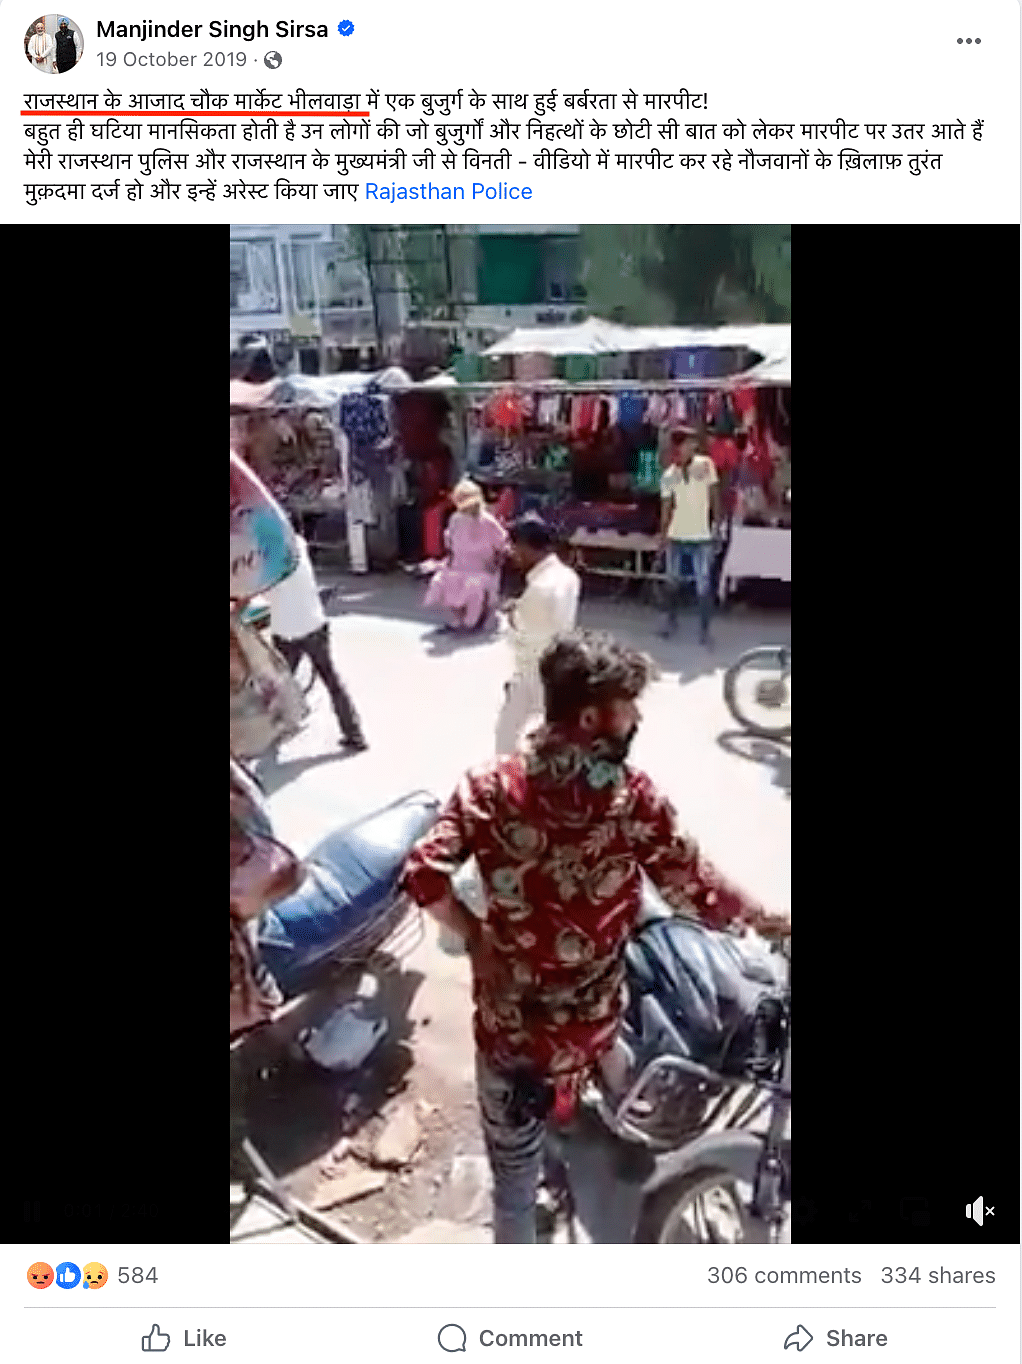 The video dates back to October 2019, when Hotchand was beat up by local shopkeepers after he slapped one of them.